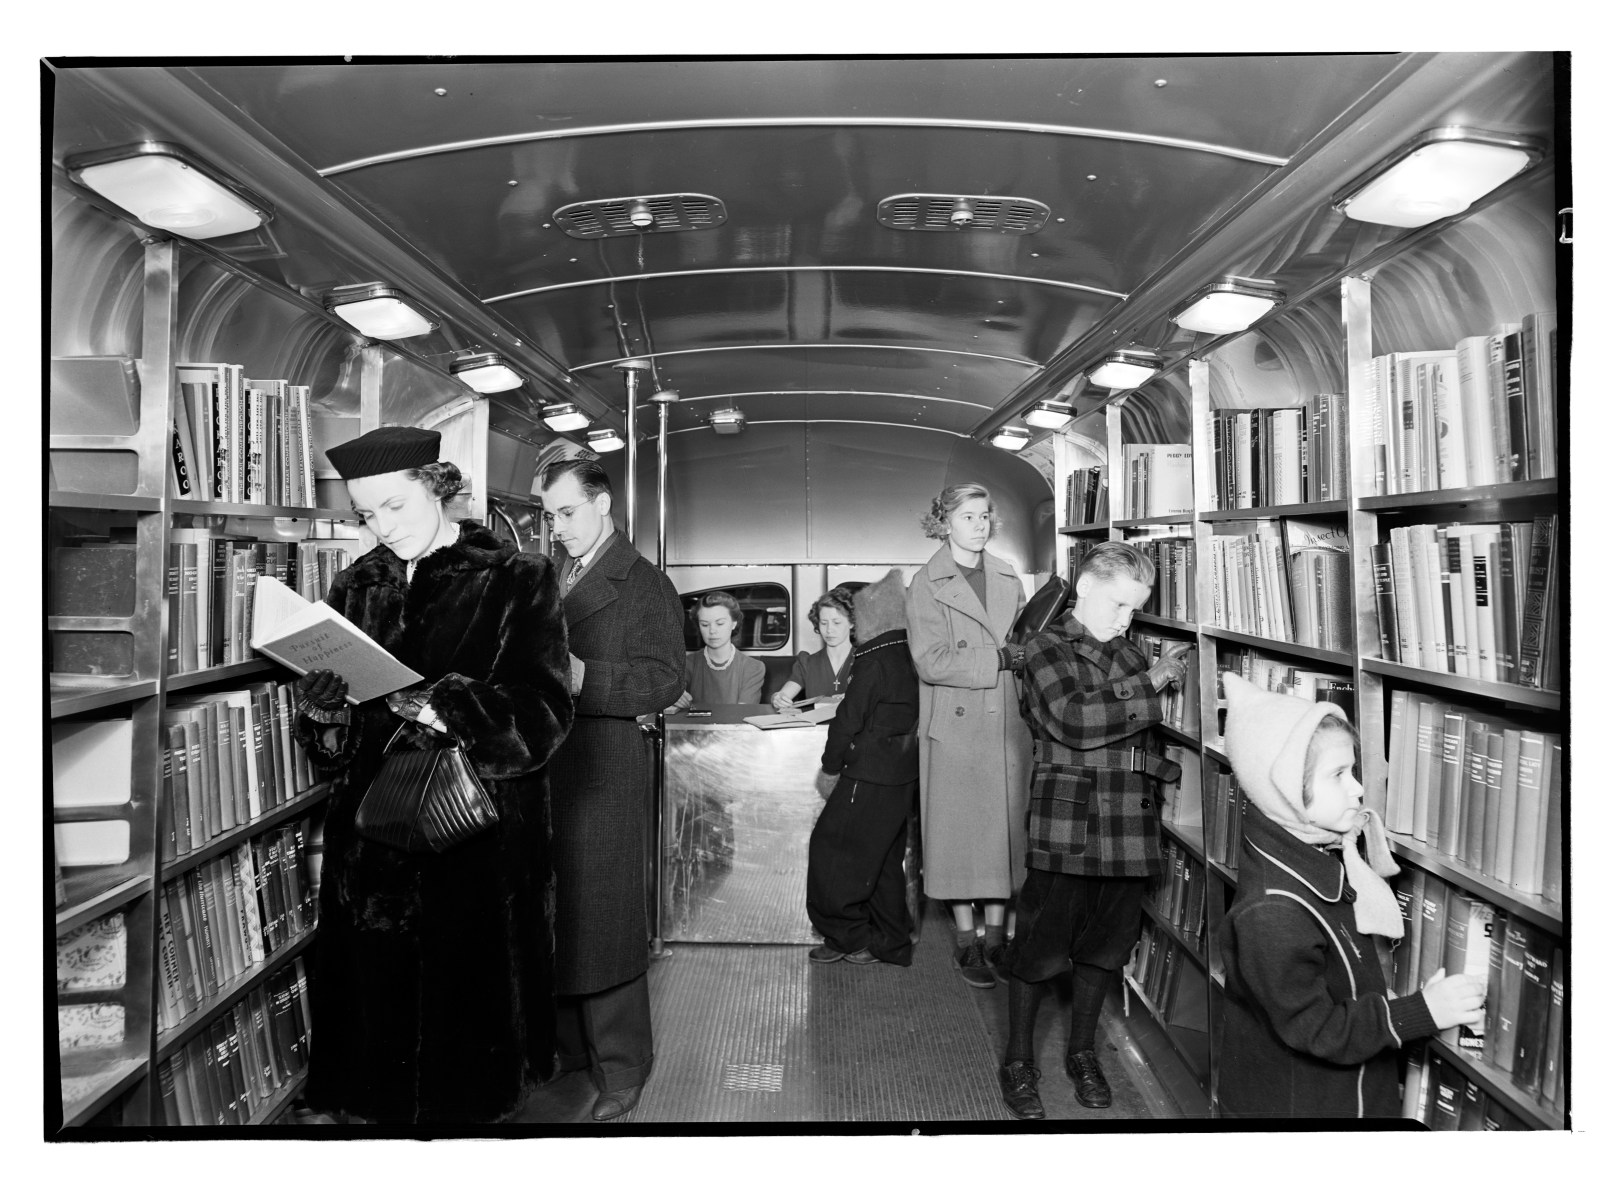 This is a bookmobile, basically a bus full of books, in Queens. There was a giant library in the middle of Manhattan, but Queens and Brooklyn actually had their own independent library systems. As the city was growing, the library networks needed to grow to expand with it. Bookmobiles were the way that growing neighborhoods in Queens and parts of Staten Island were accessed. Today, libraries exist as digital resources that can be accessed from anywhere in the world. At the time this was an incredibly ambitious project to bring books, knowledge and information to a vast and diverse population.